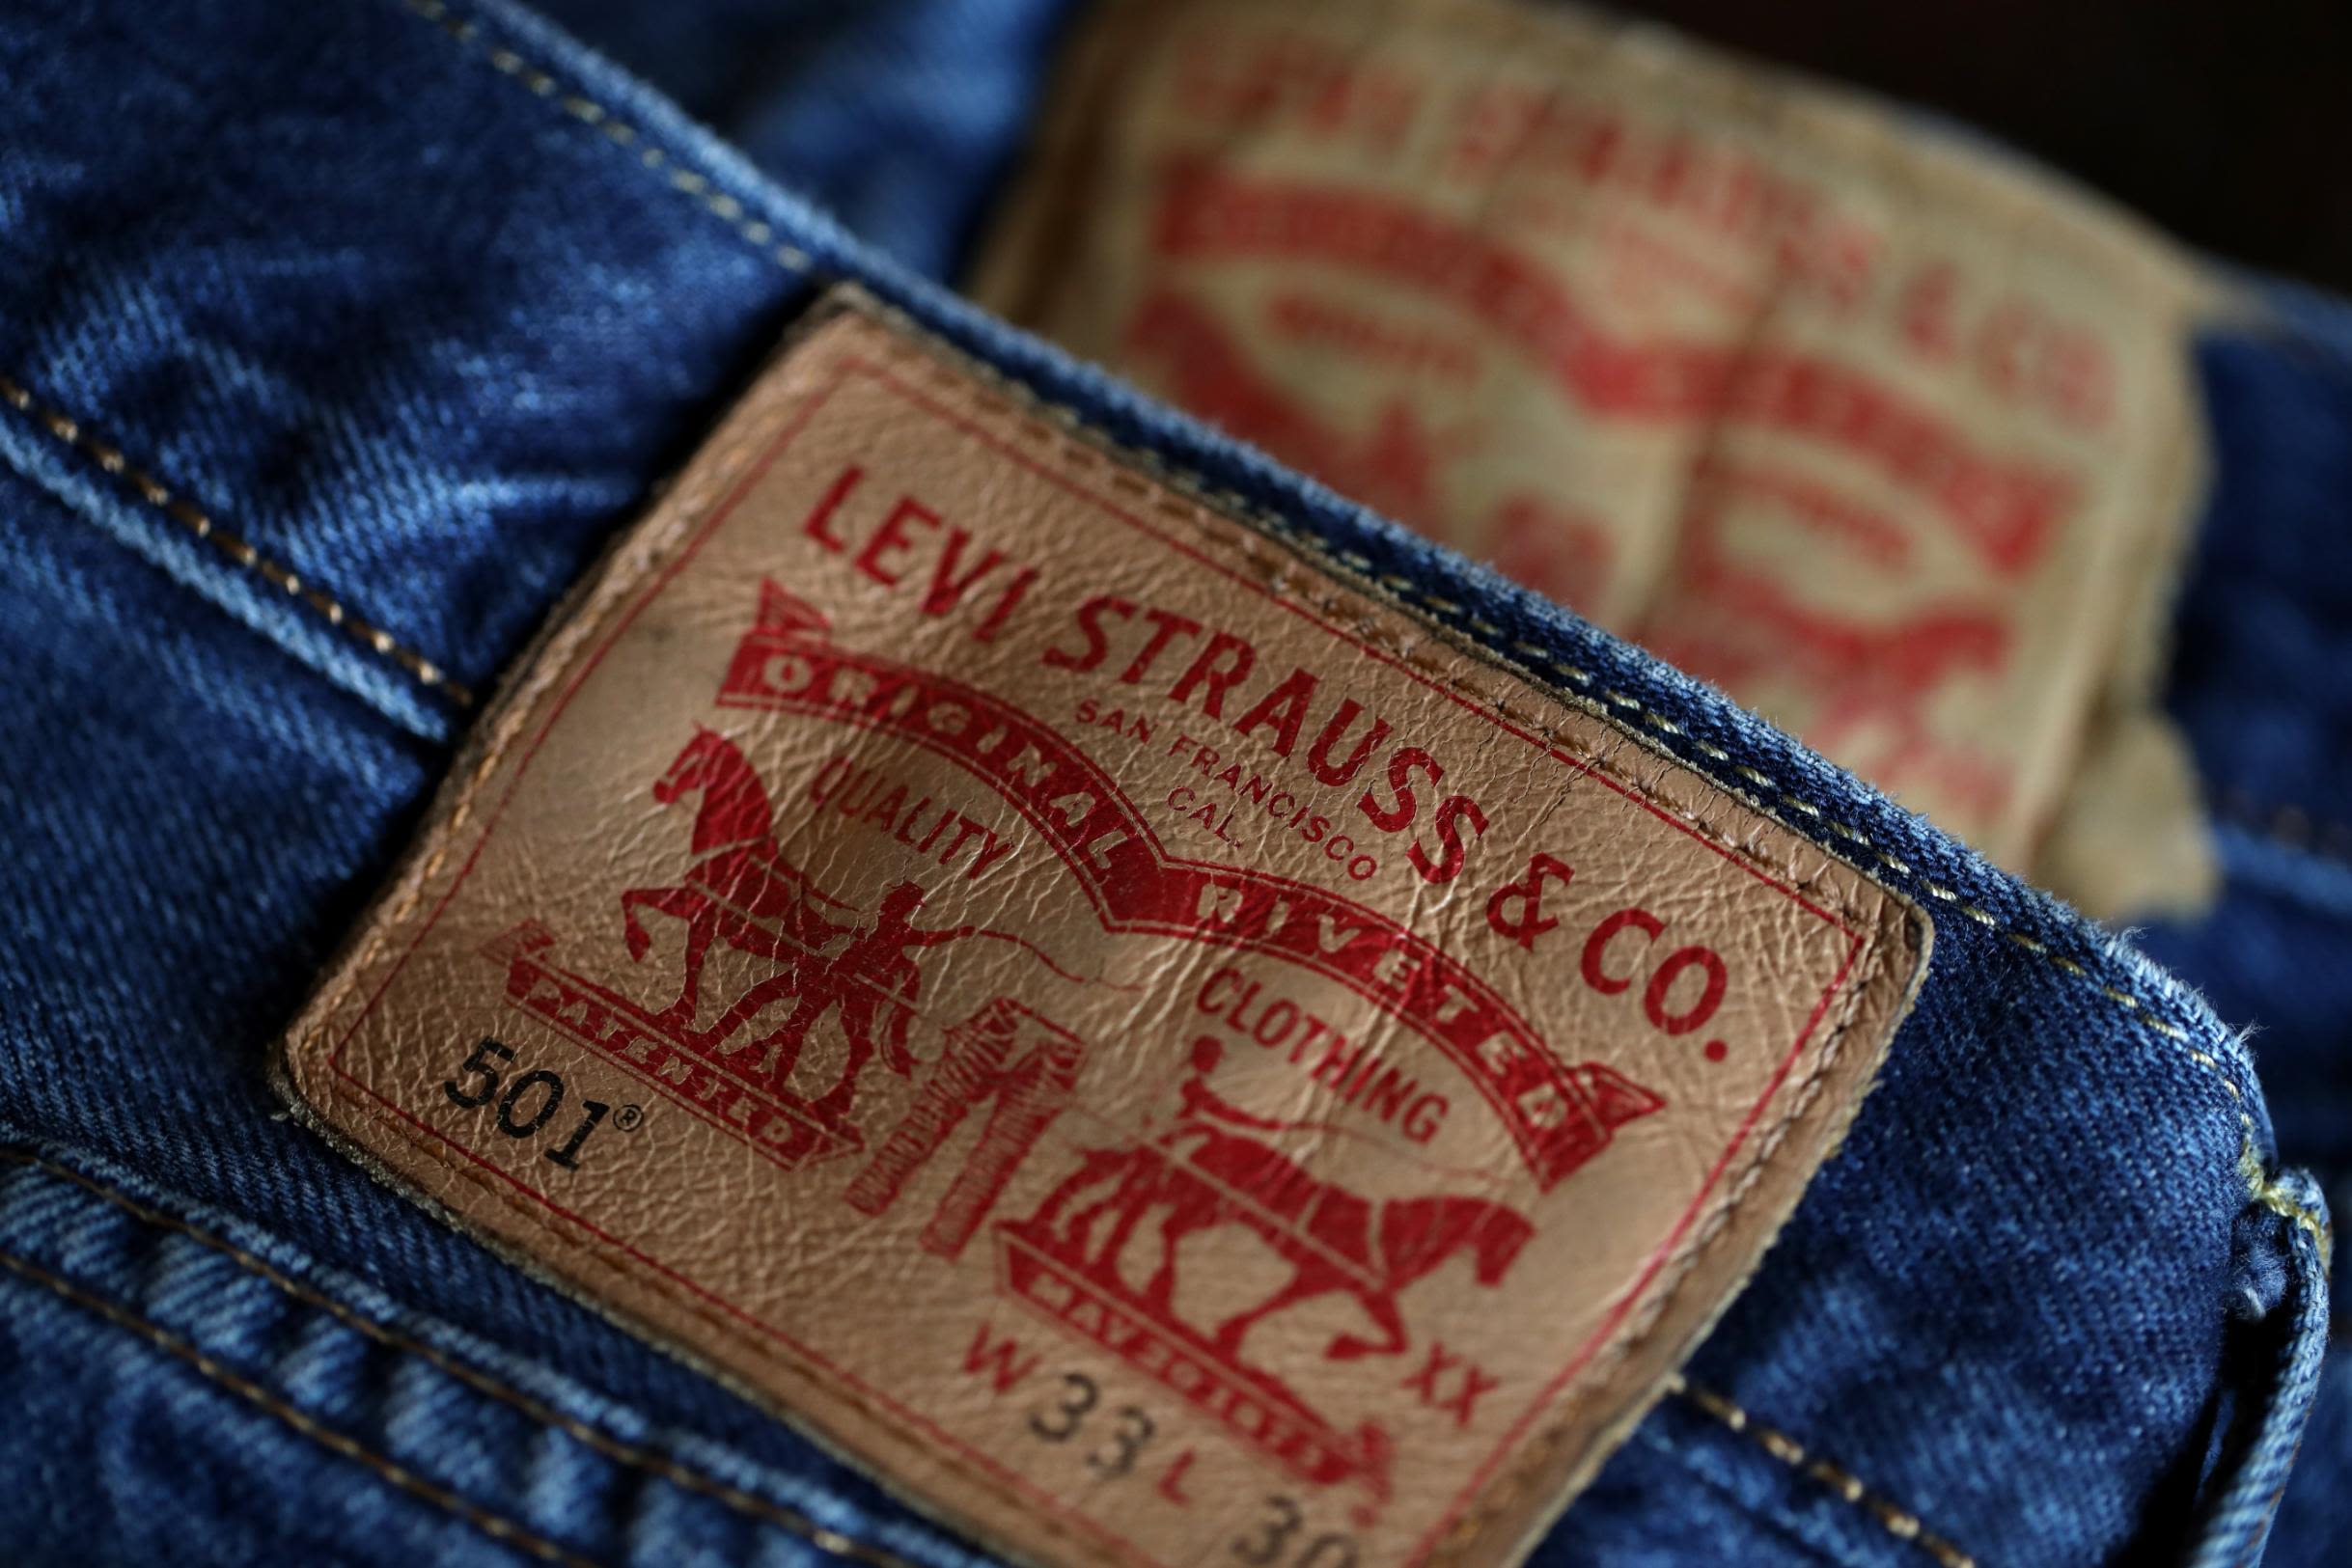 Levi stock to start trading in New York in $620 million IPO | CNN Business